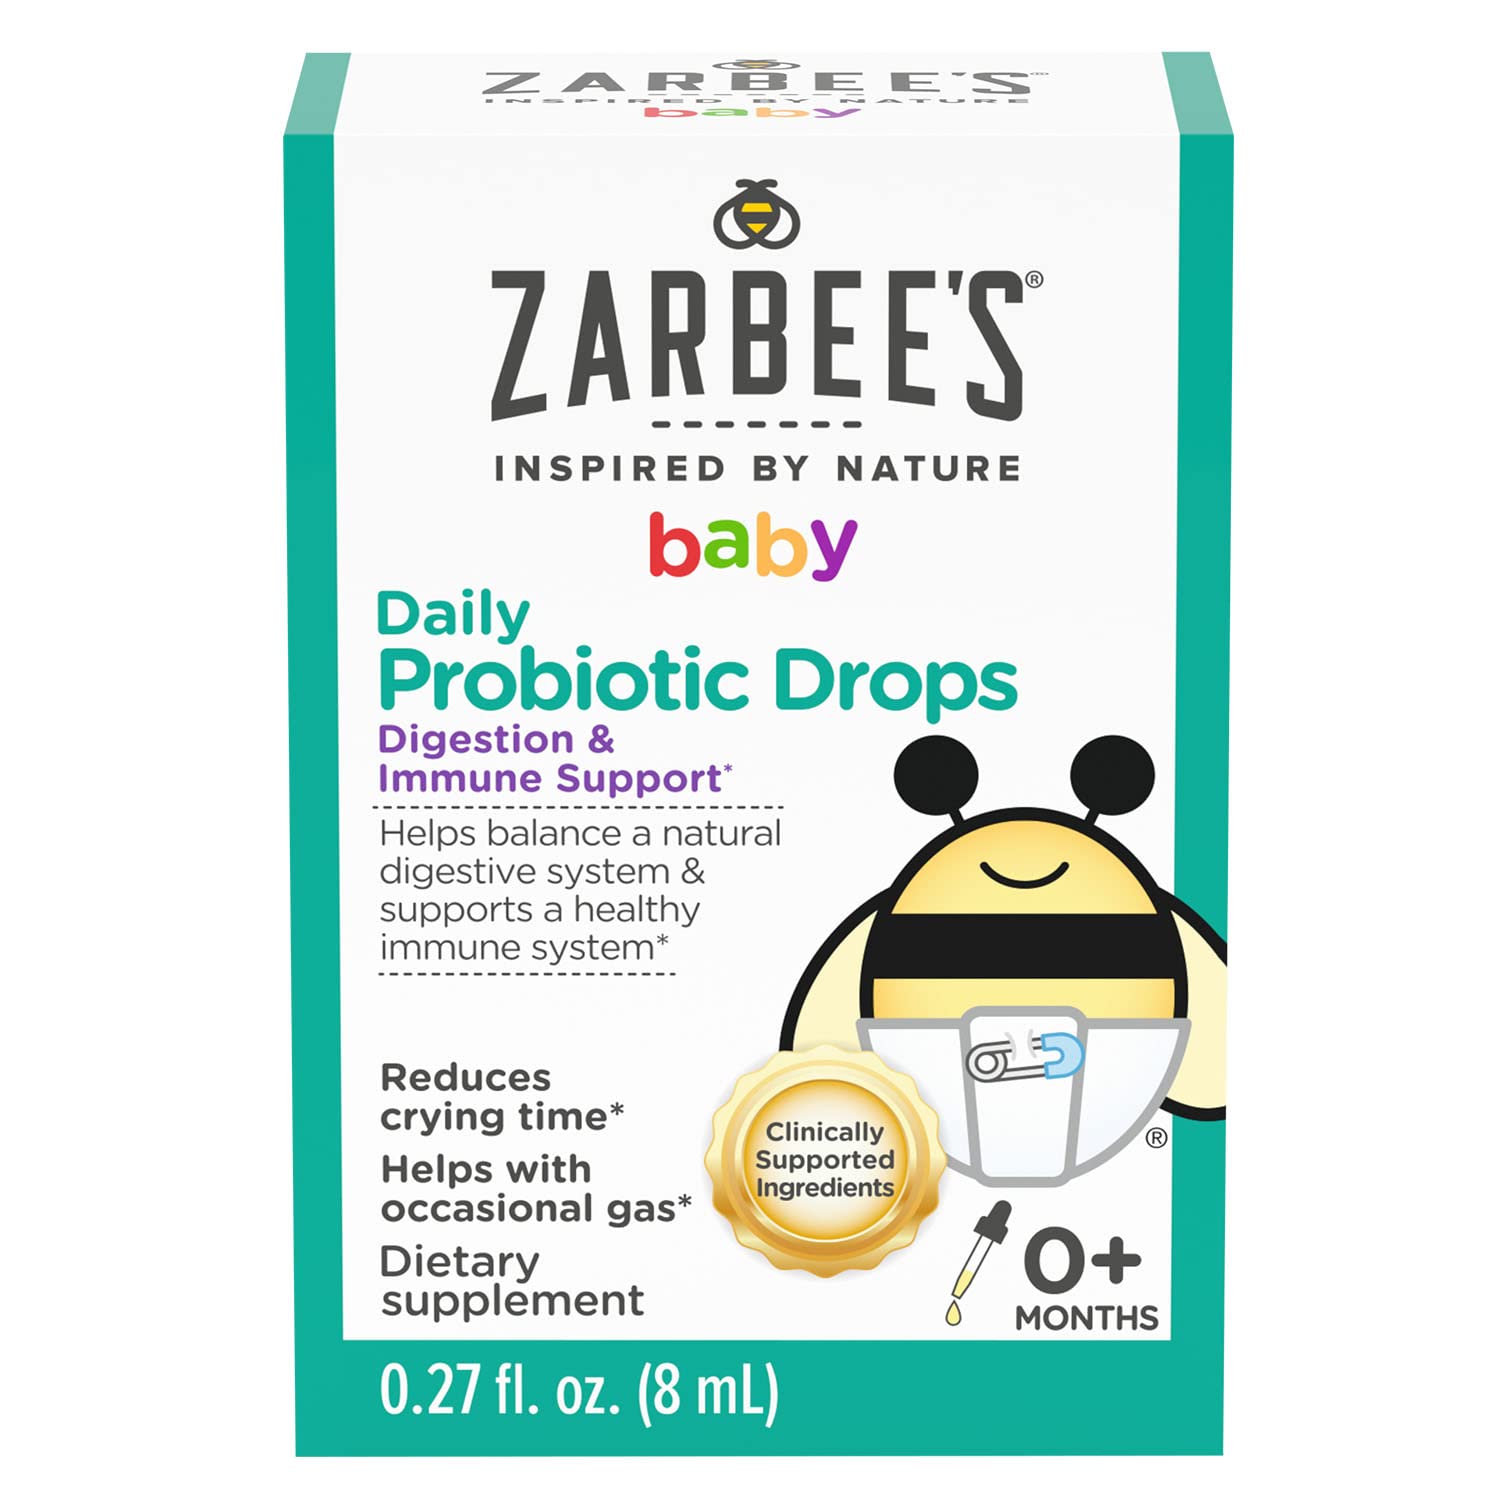 Zarbee's Baby Probiotic Drops, Daily Digestive + Immune Support, Newborn Infants & Up, 0.27 Fl Oz